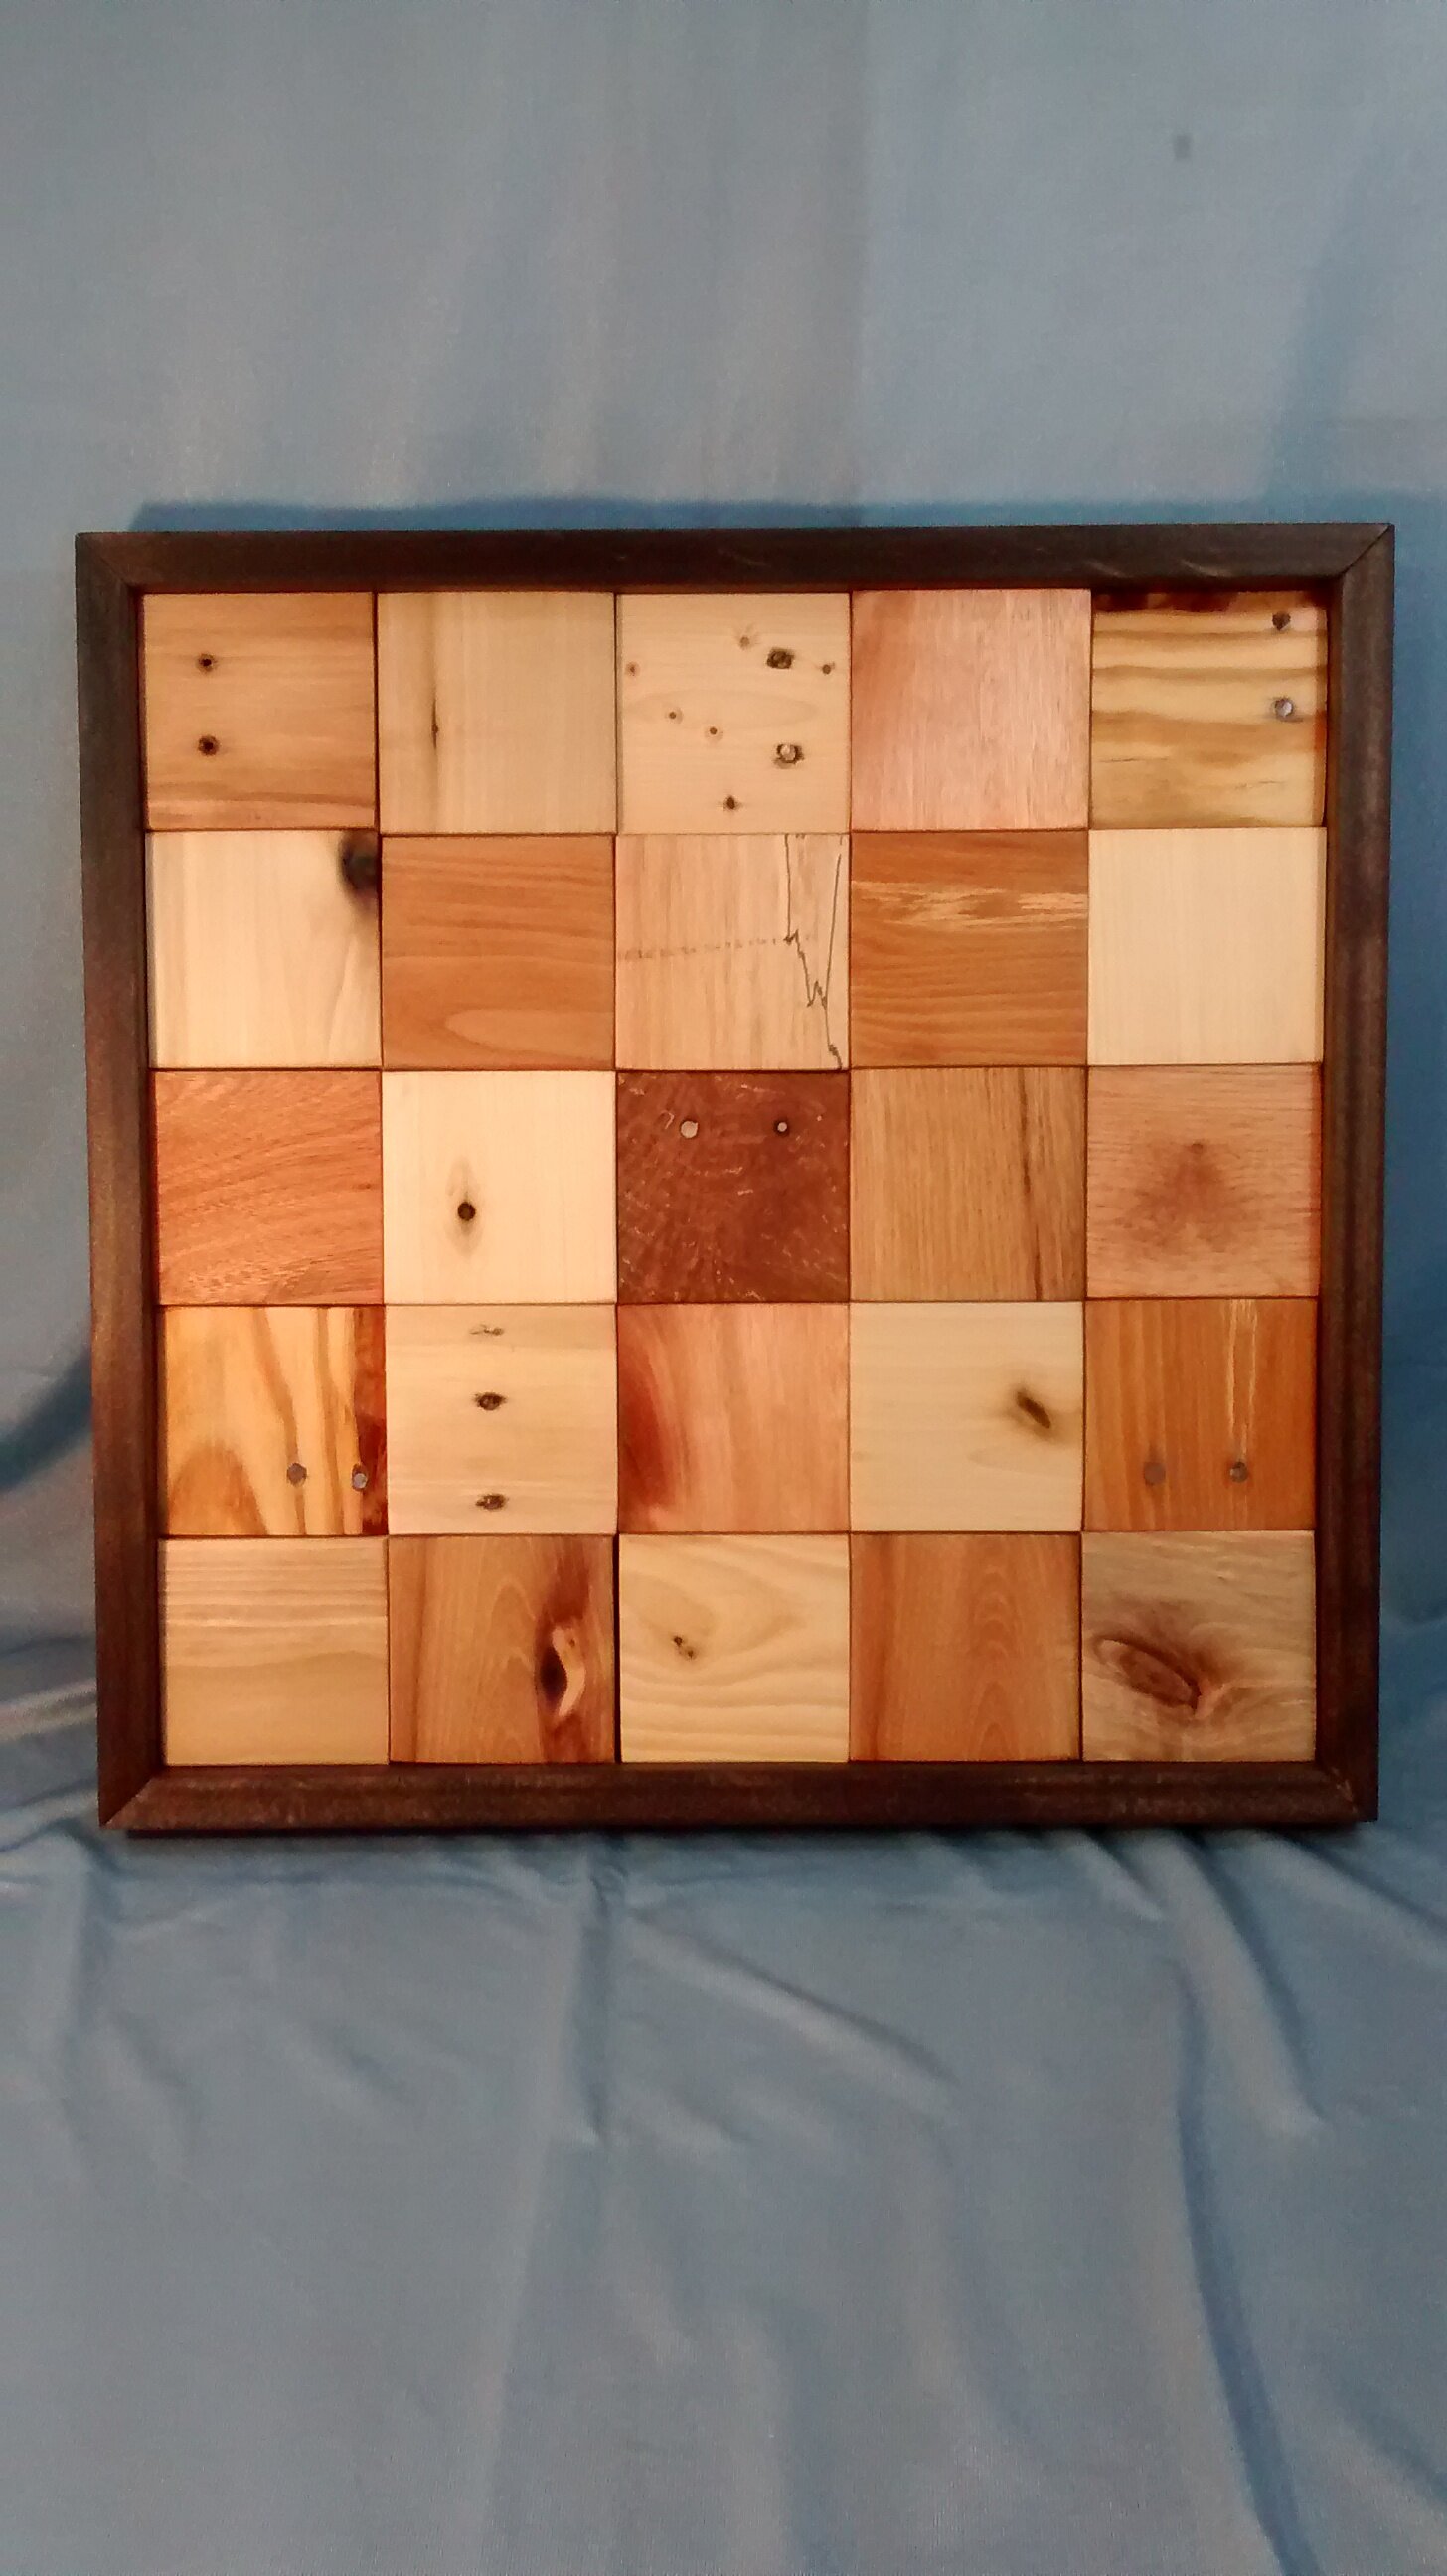 25 Small Squares Reclaimed Wood Wall Art